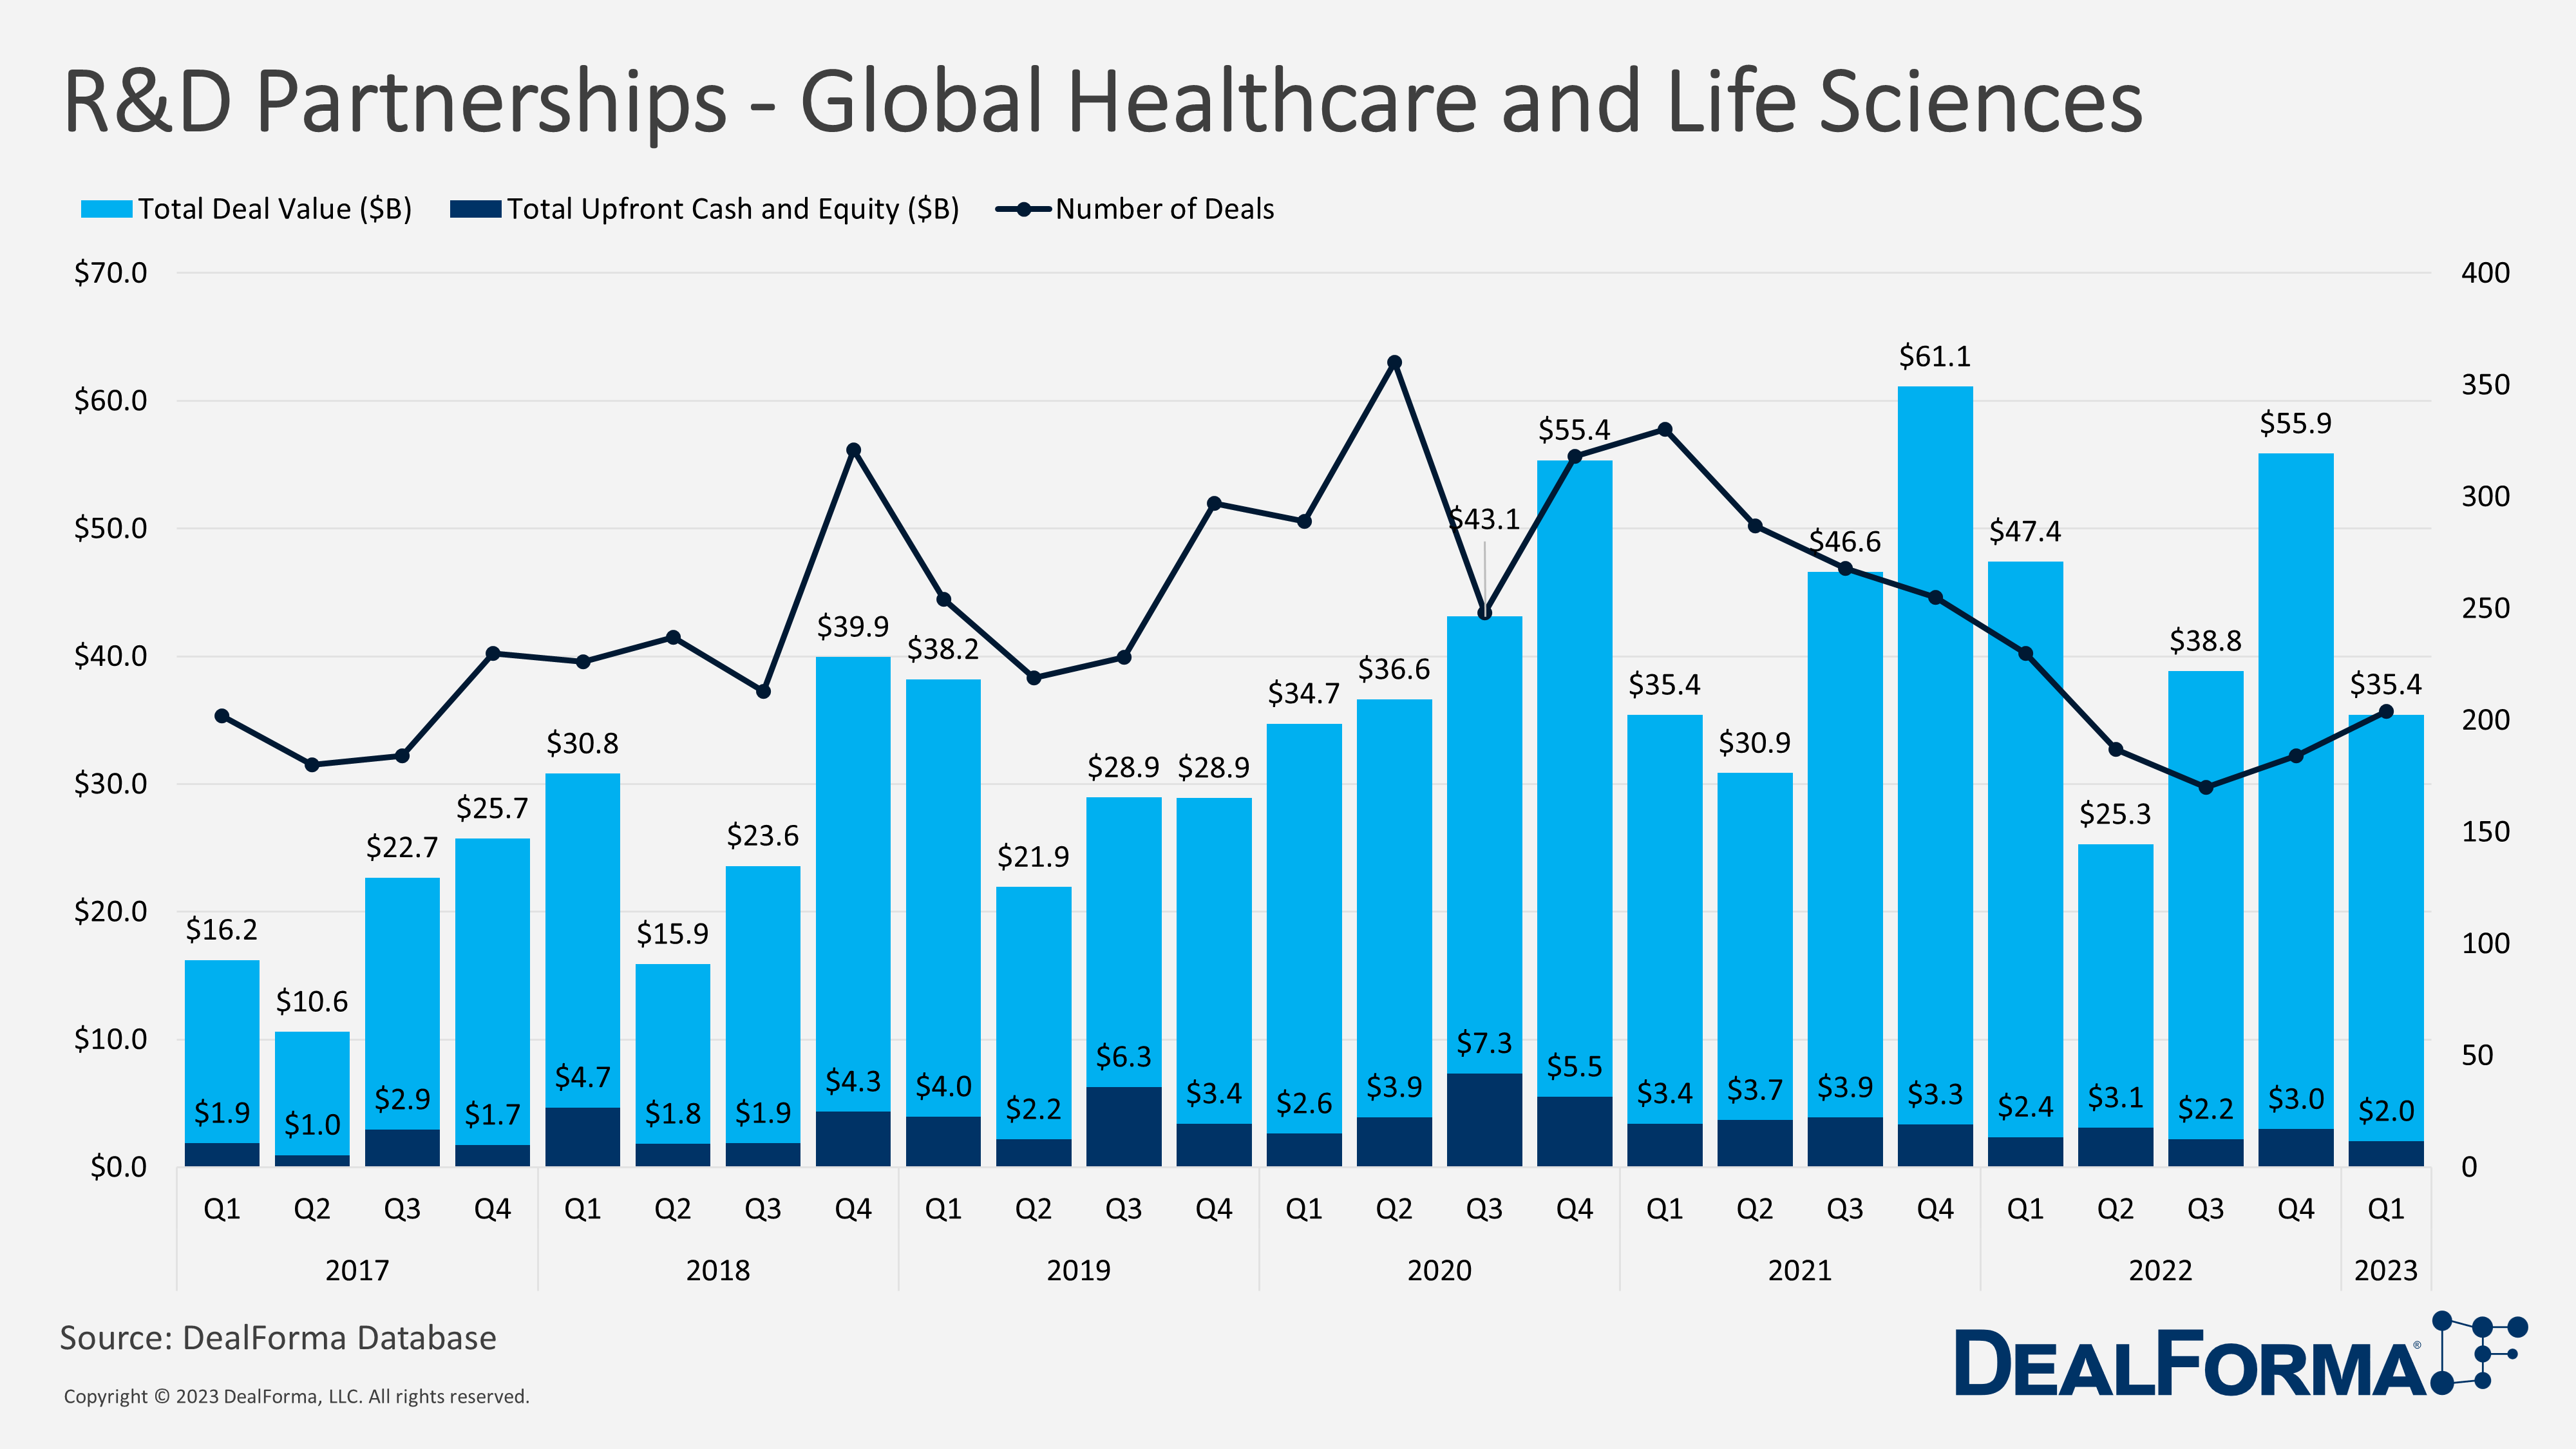 R&D Partnerships - Global Healthcare and Life Sciences